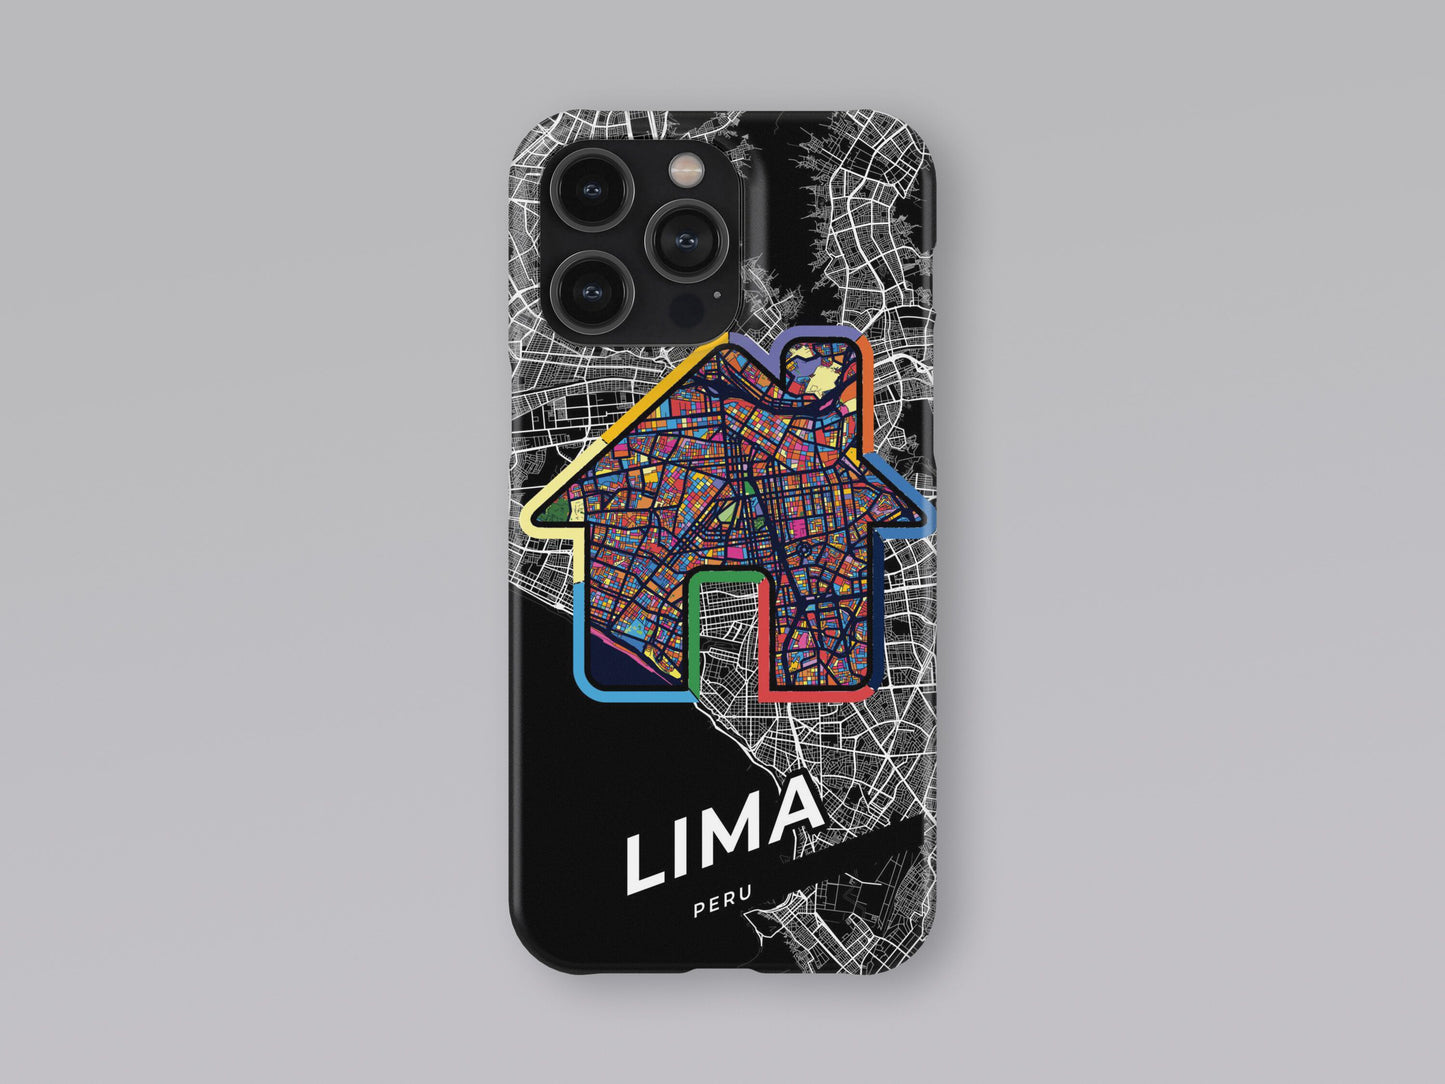 Lima Peru slim phone case with colorful icon. Birthday, wedding or housewarming gift. Couple match cases. 3